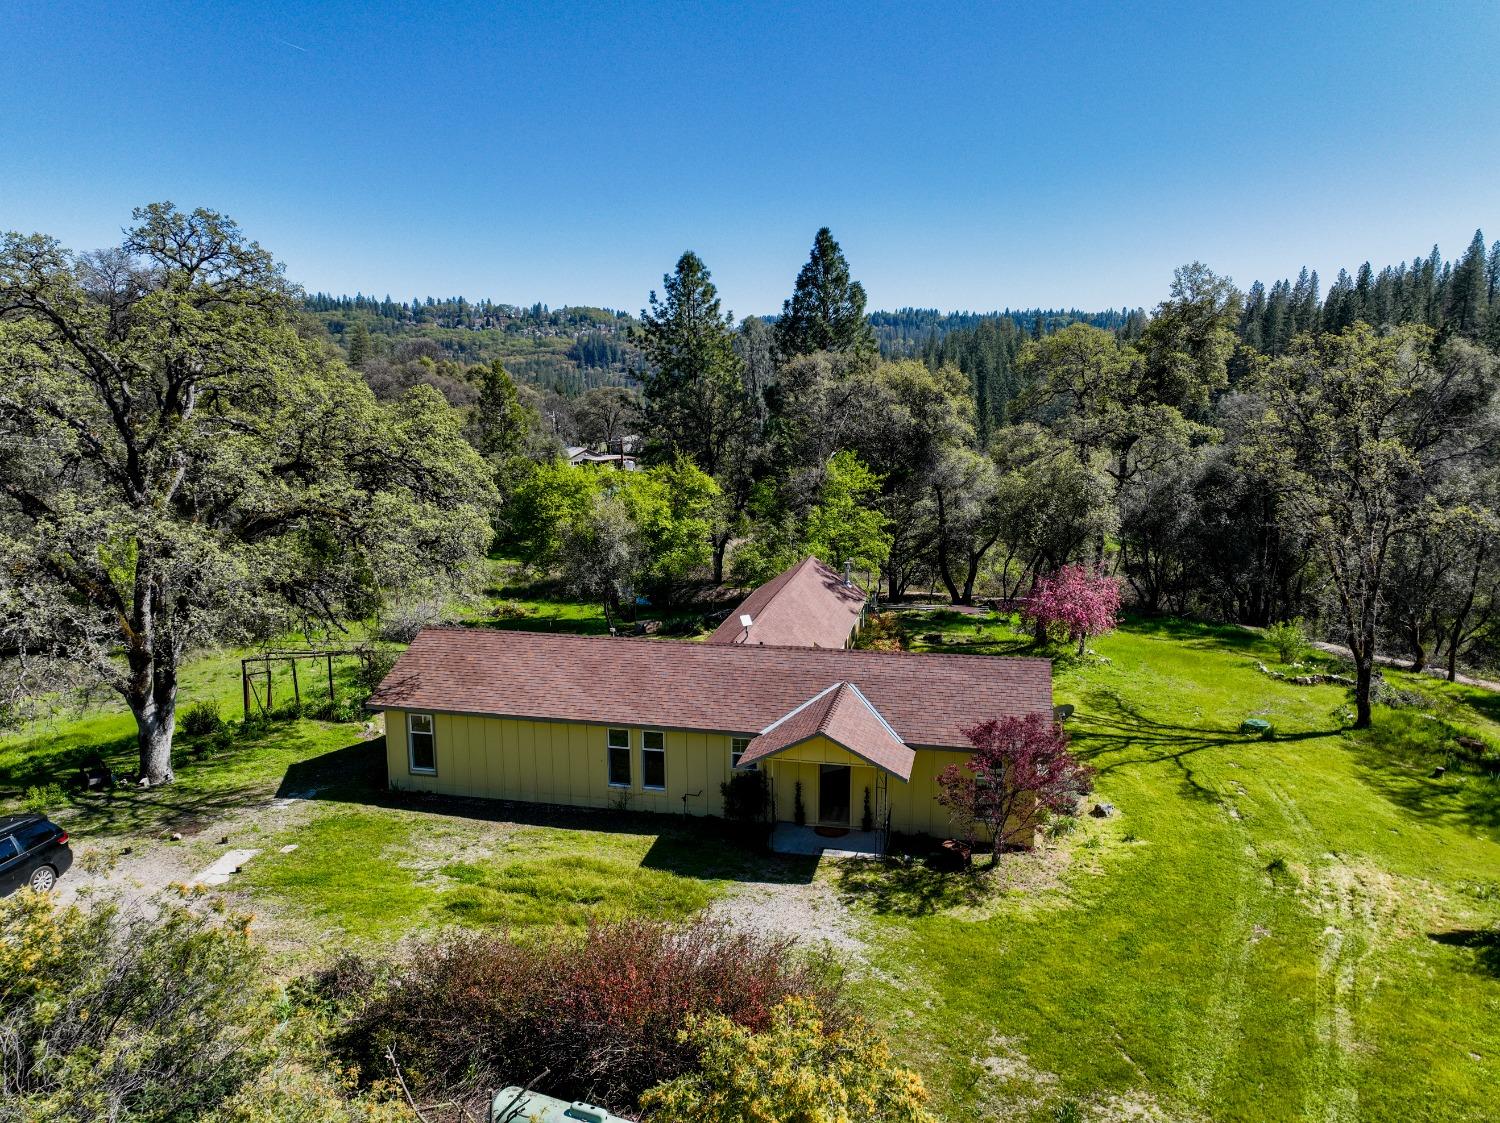 Photo of 11387 Newtown Rd in Nevada City, CA